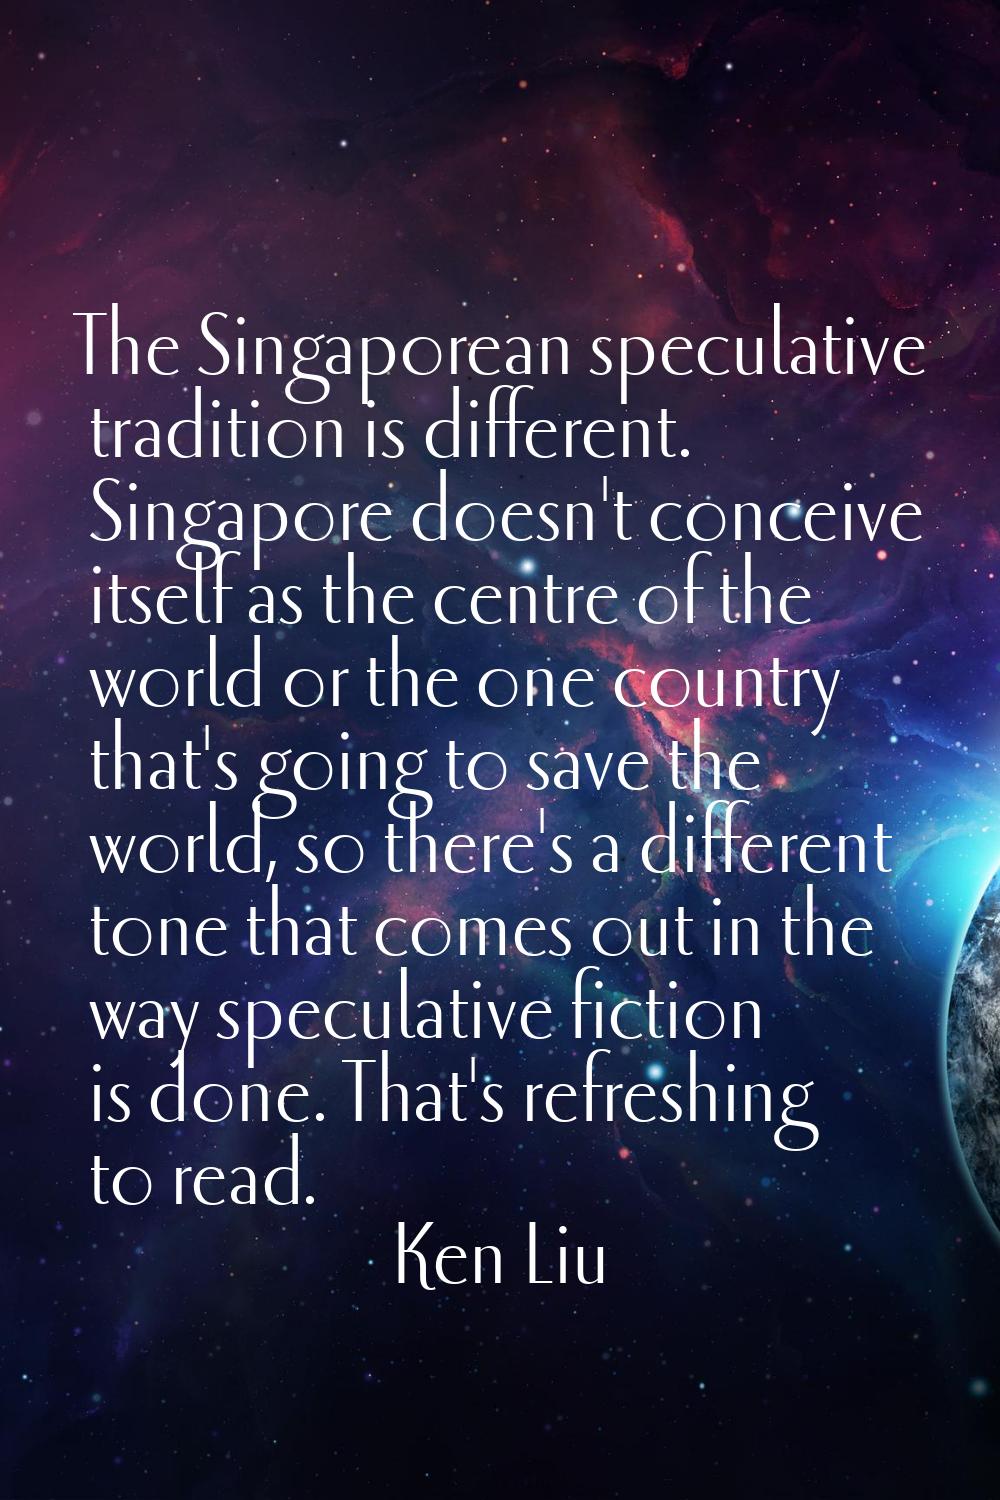 The Singaporean speculative tradition is different. Singapore doesn't conceive itself as the centre